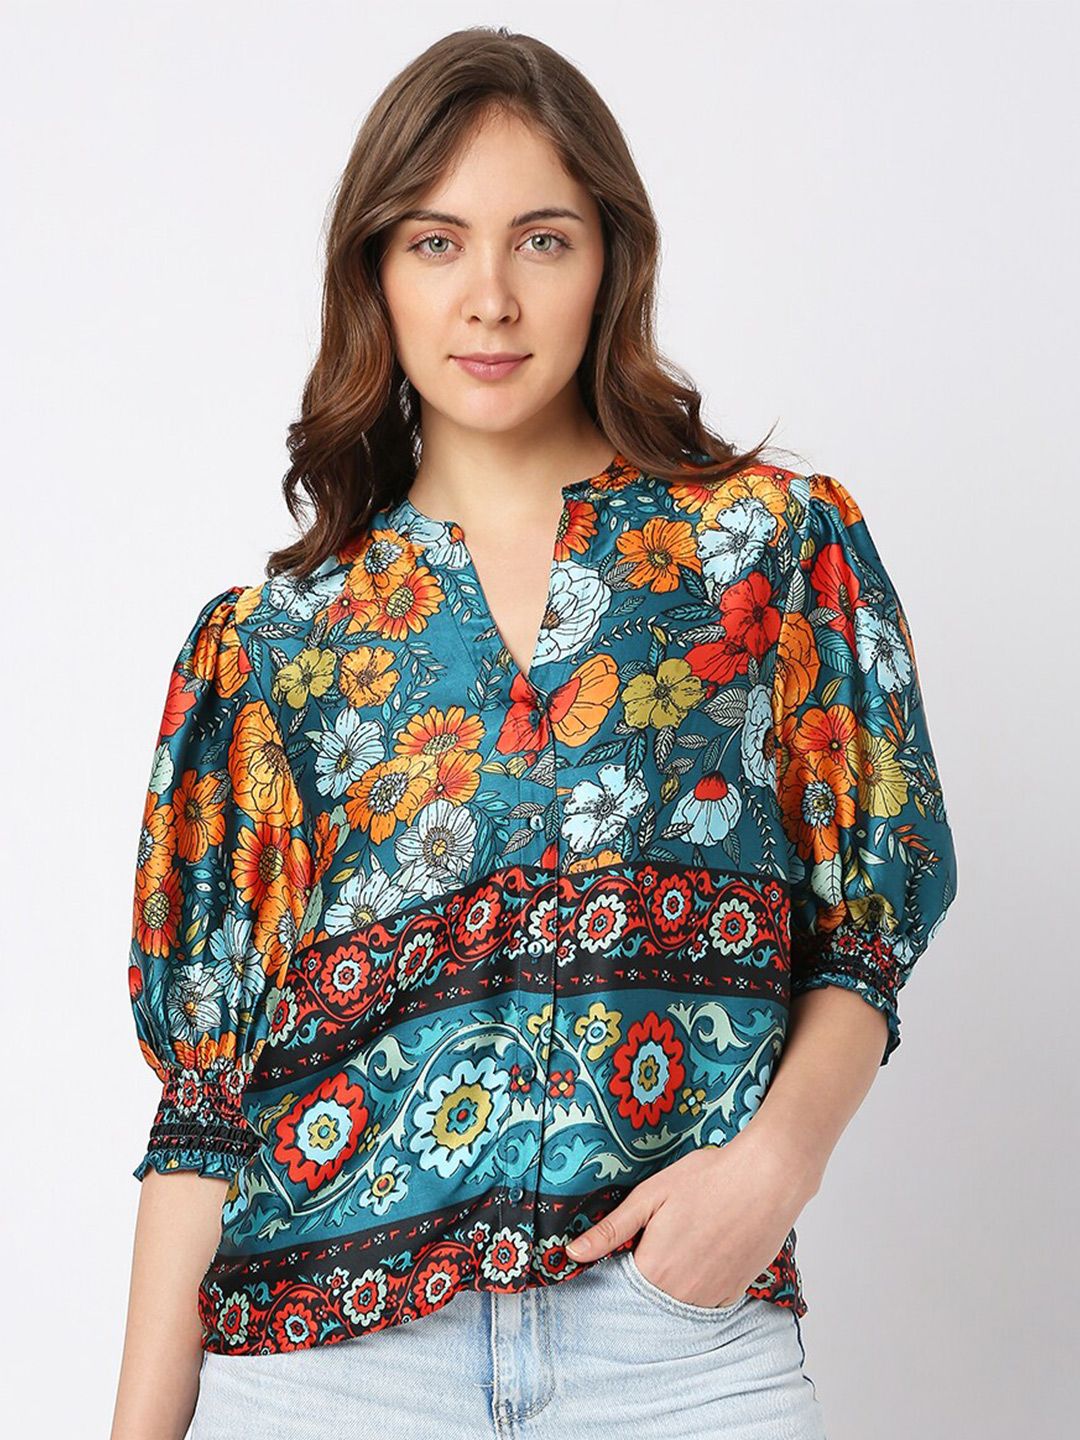 Vero Moda Floral Print Puff Sleeves Top Price in India